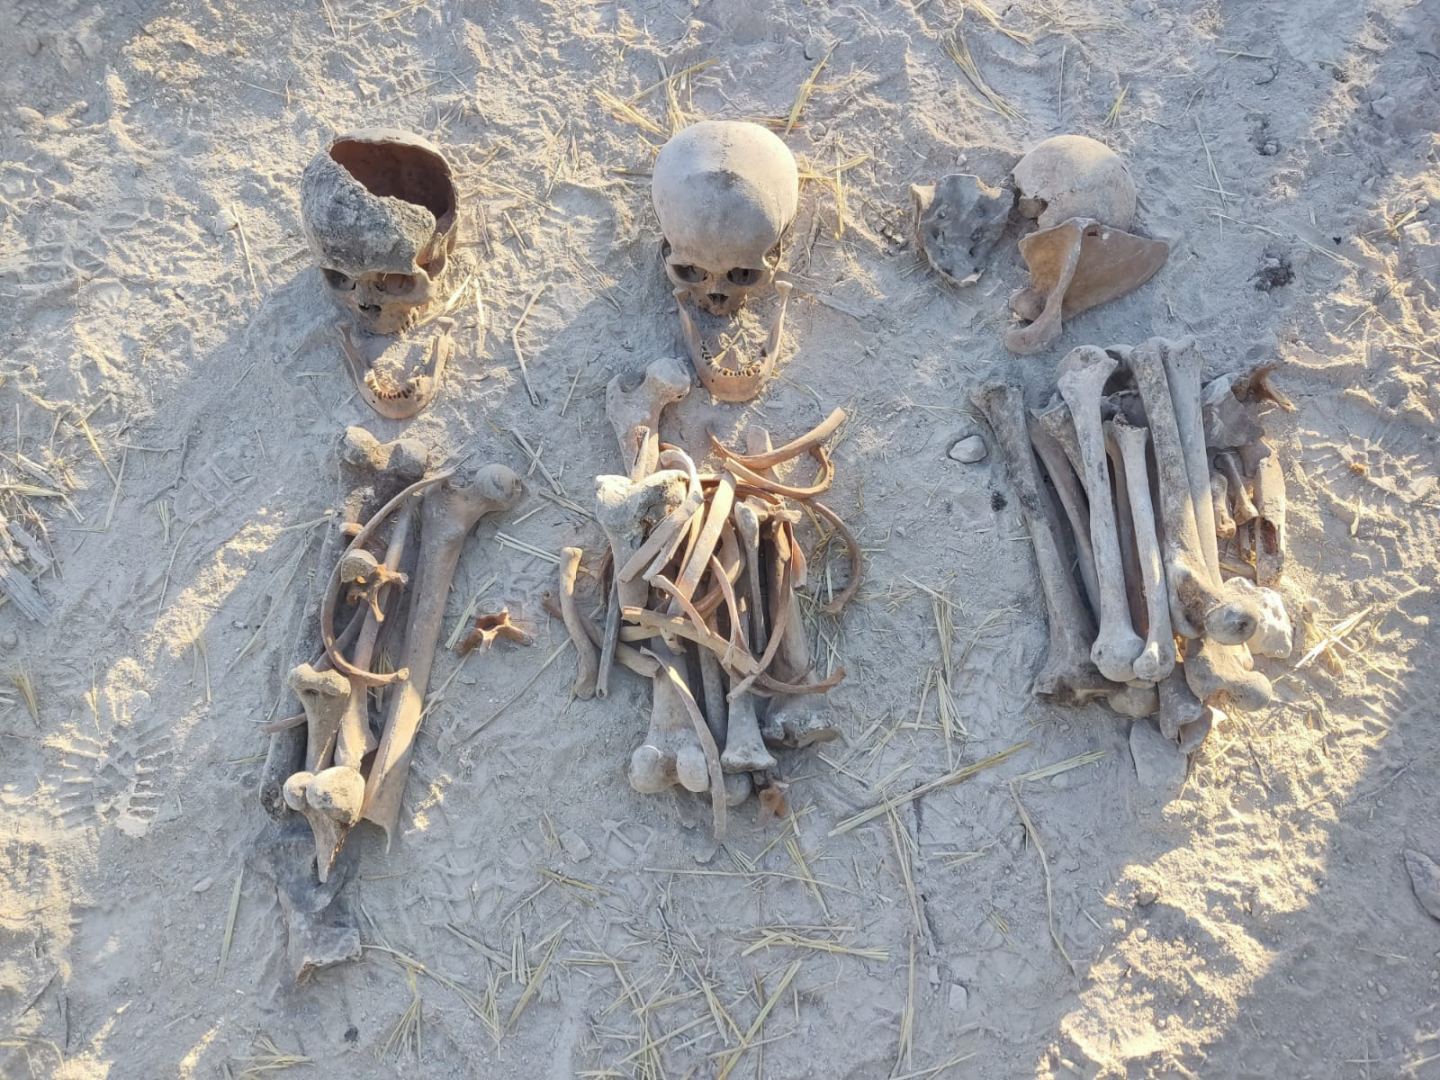 Remains found in Azerbaijan's Farrukh village - new proof of Armenian atrocities, military expert says